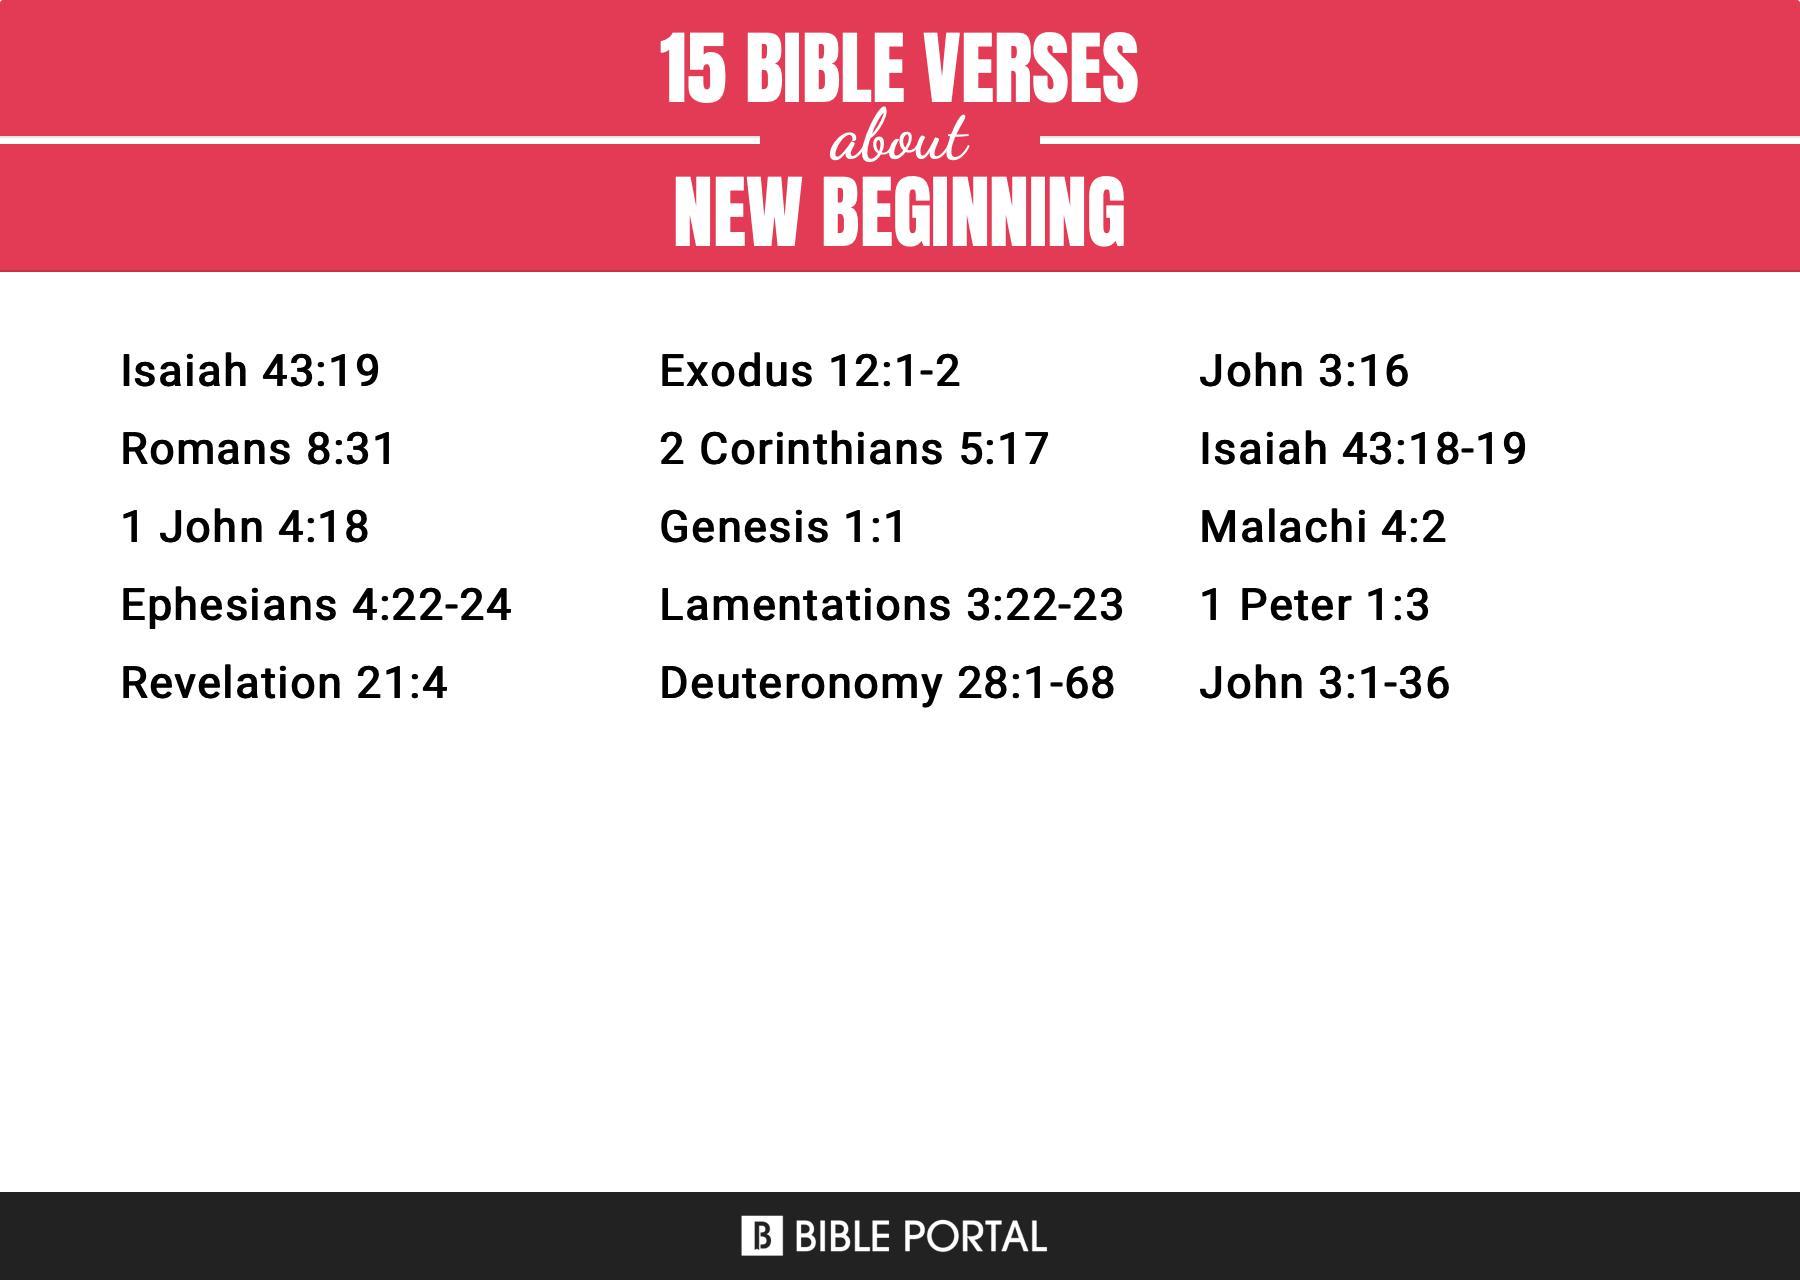 What Does the Bible Say about New Beginning?